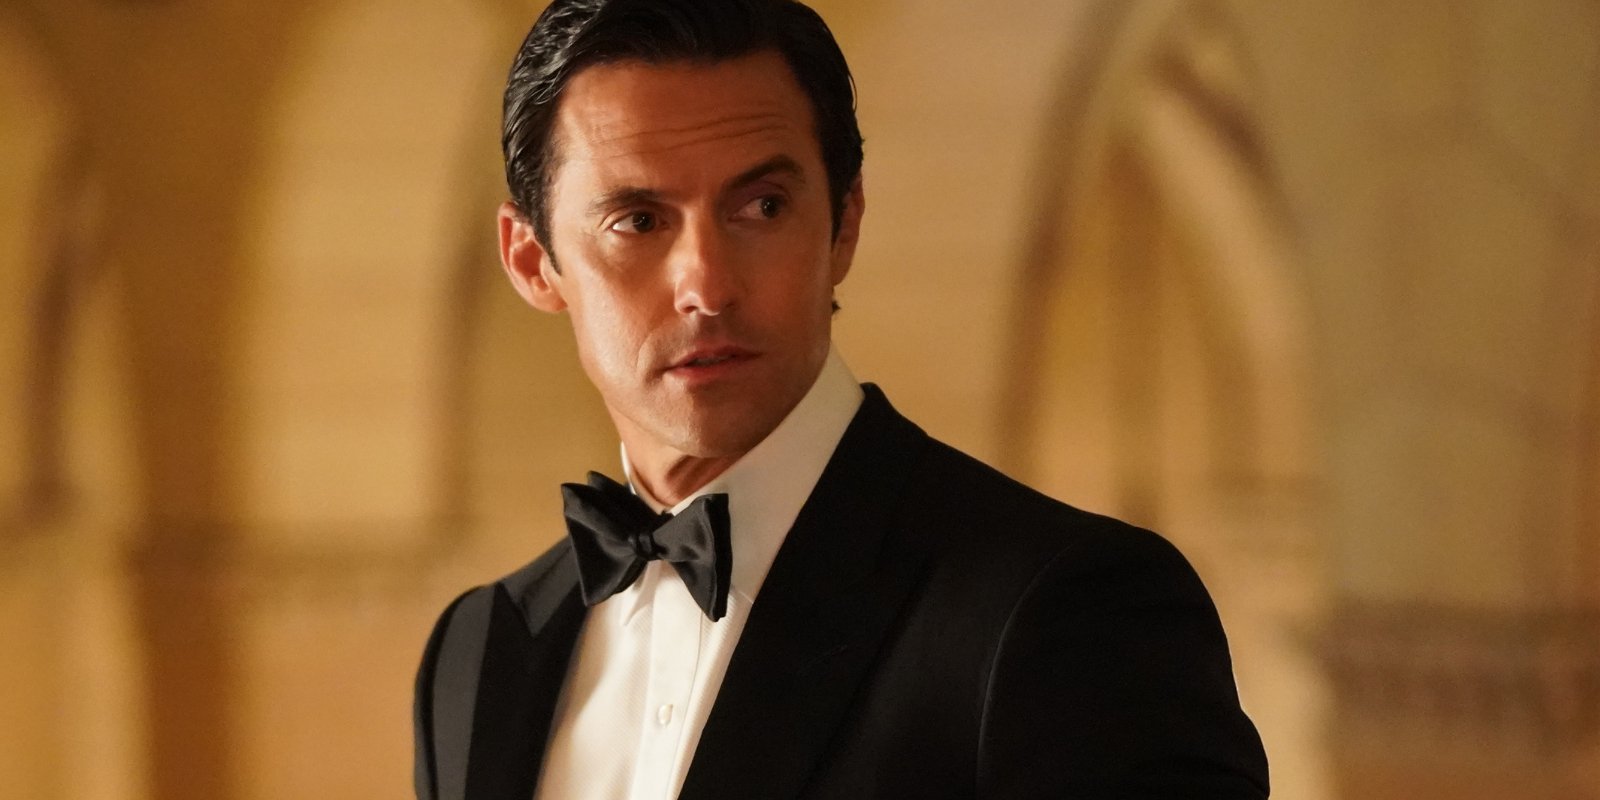 Milo Ventimiglia Is Steamy as a Con Man With a Checkered Past in 'The